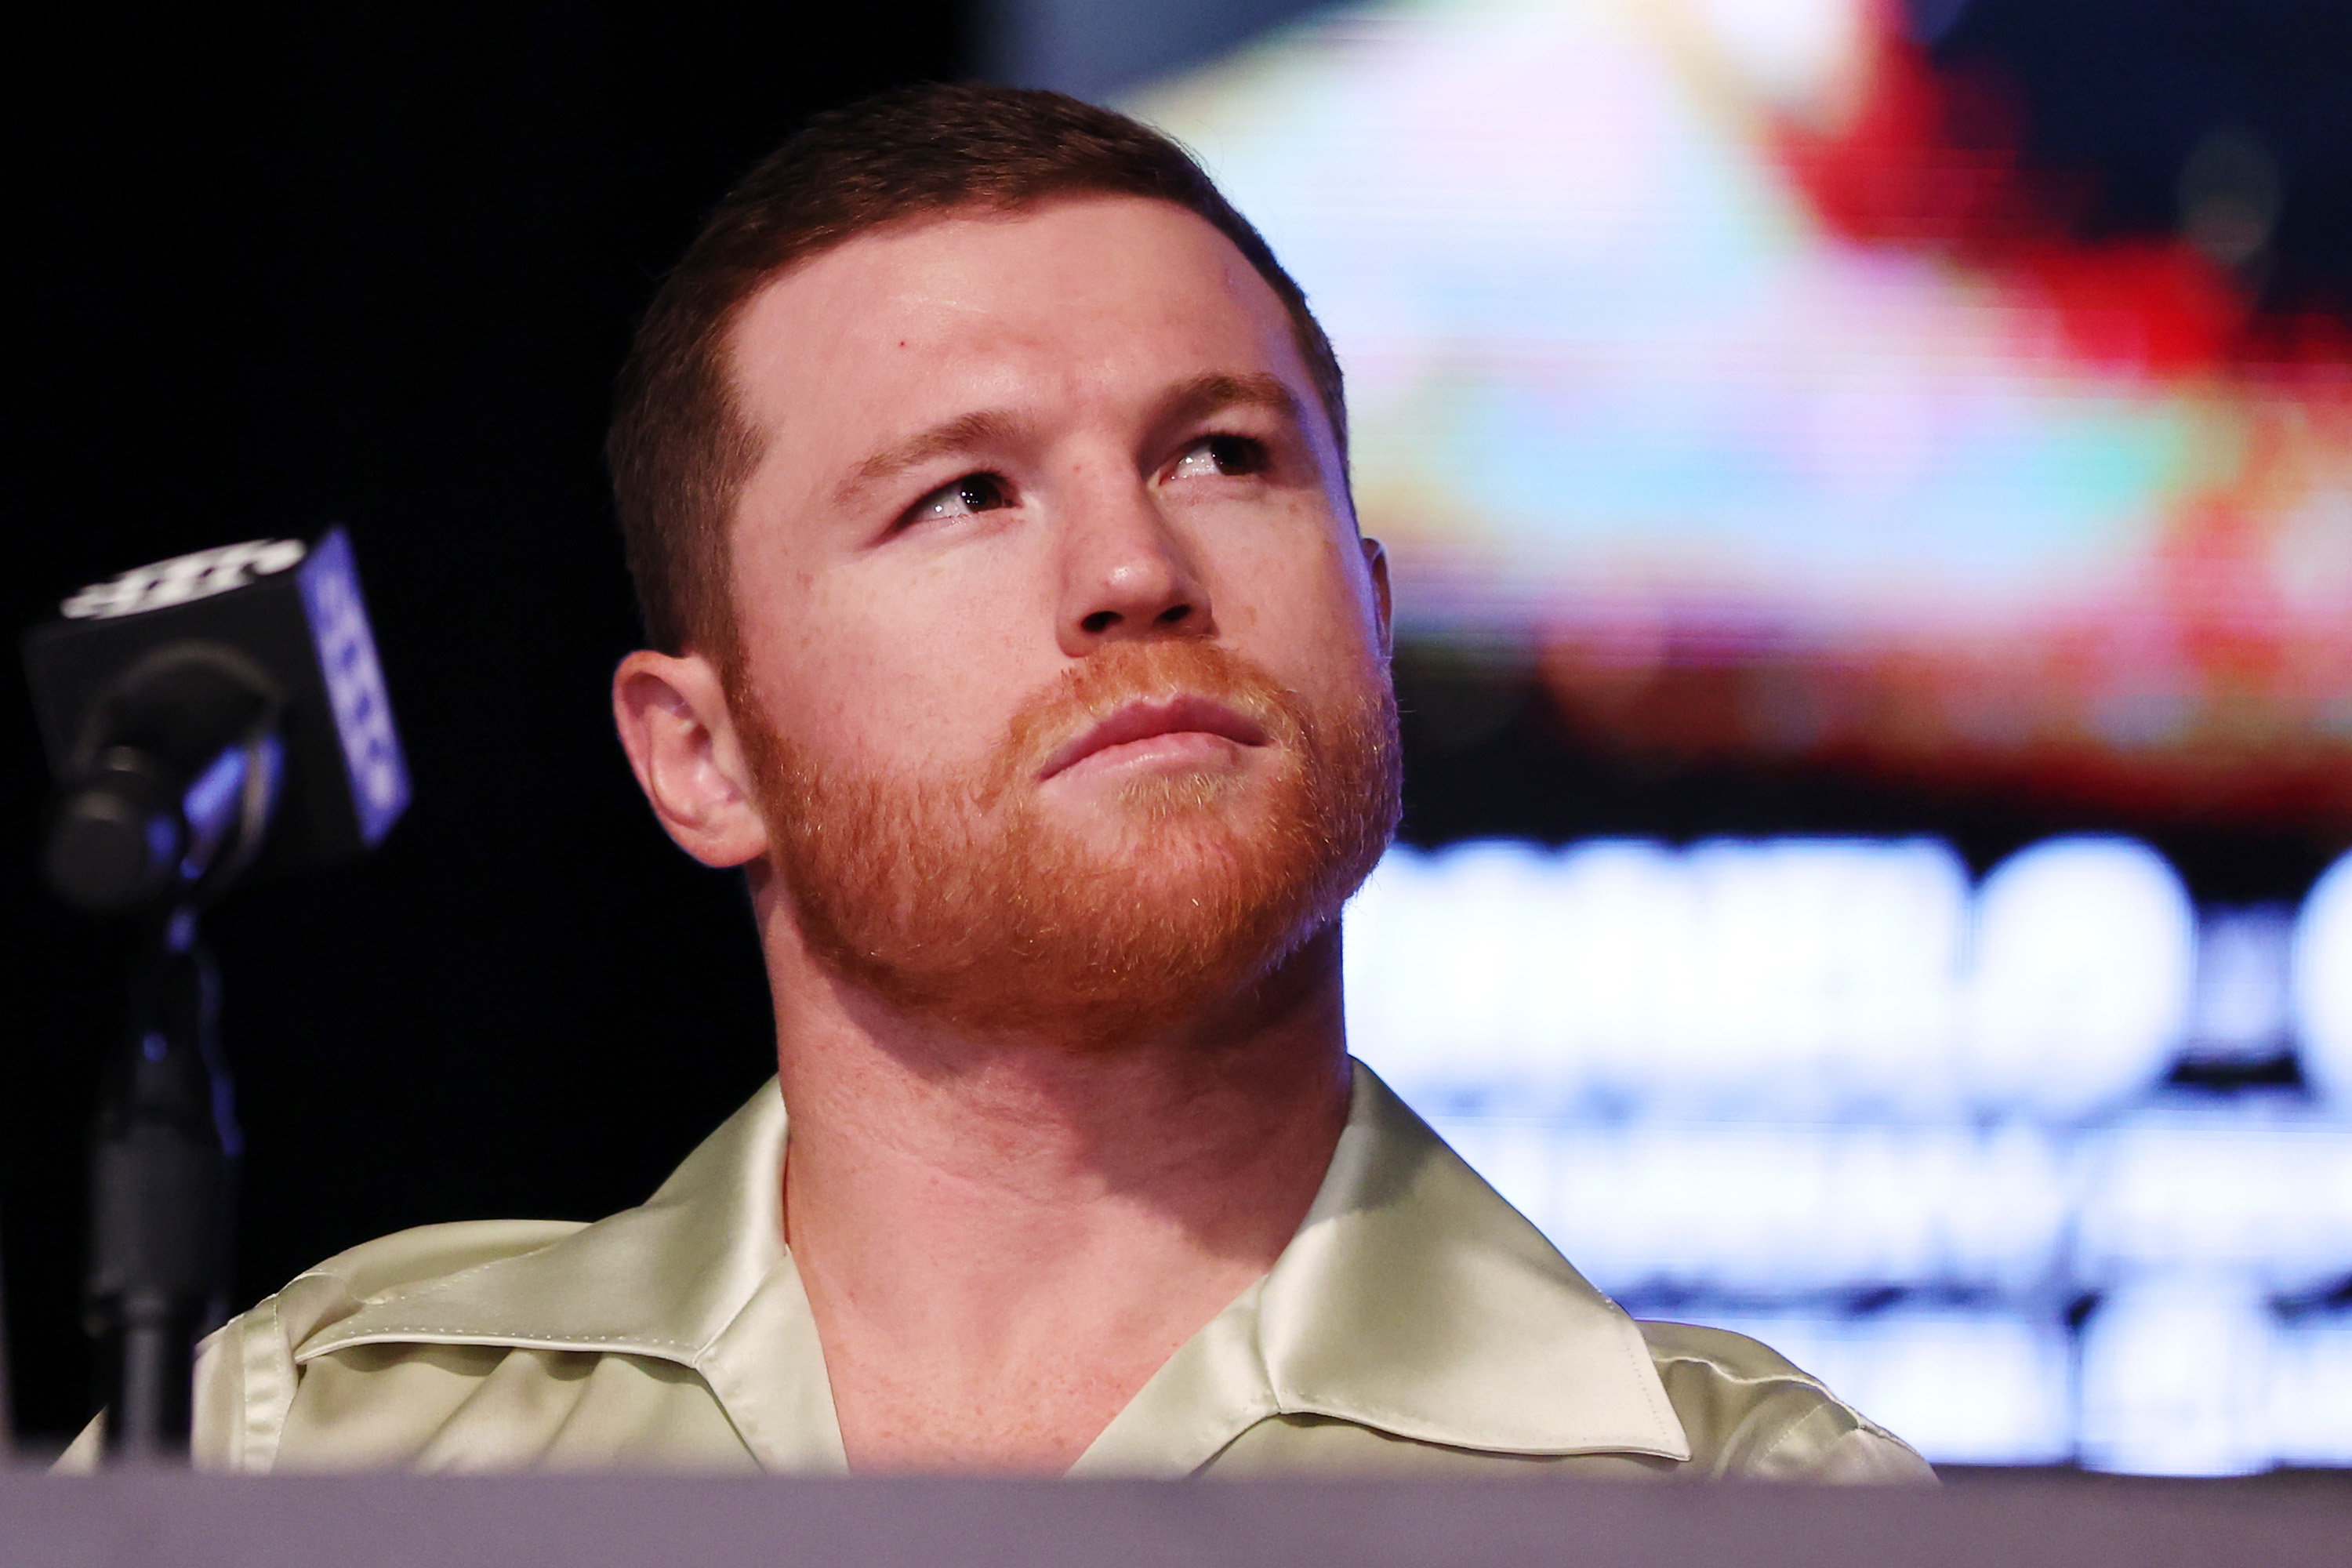 Canelo Alvarez says he’s preparing for a knockout but is more concerned with winning above all.